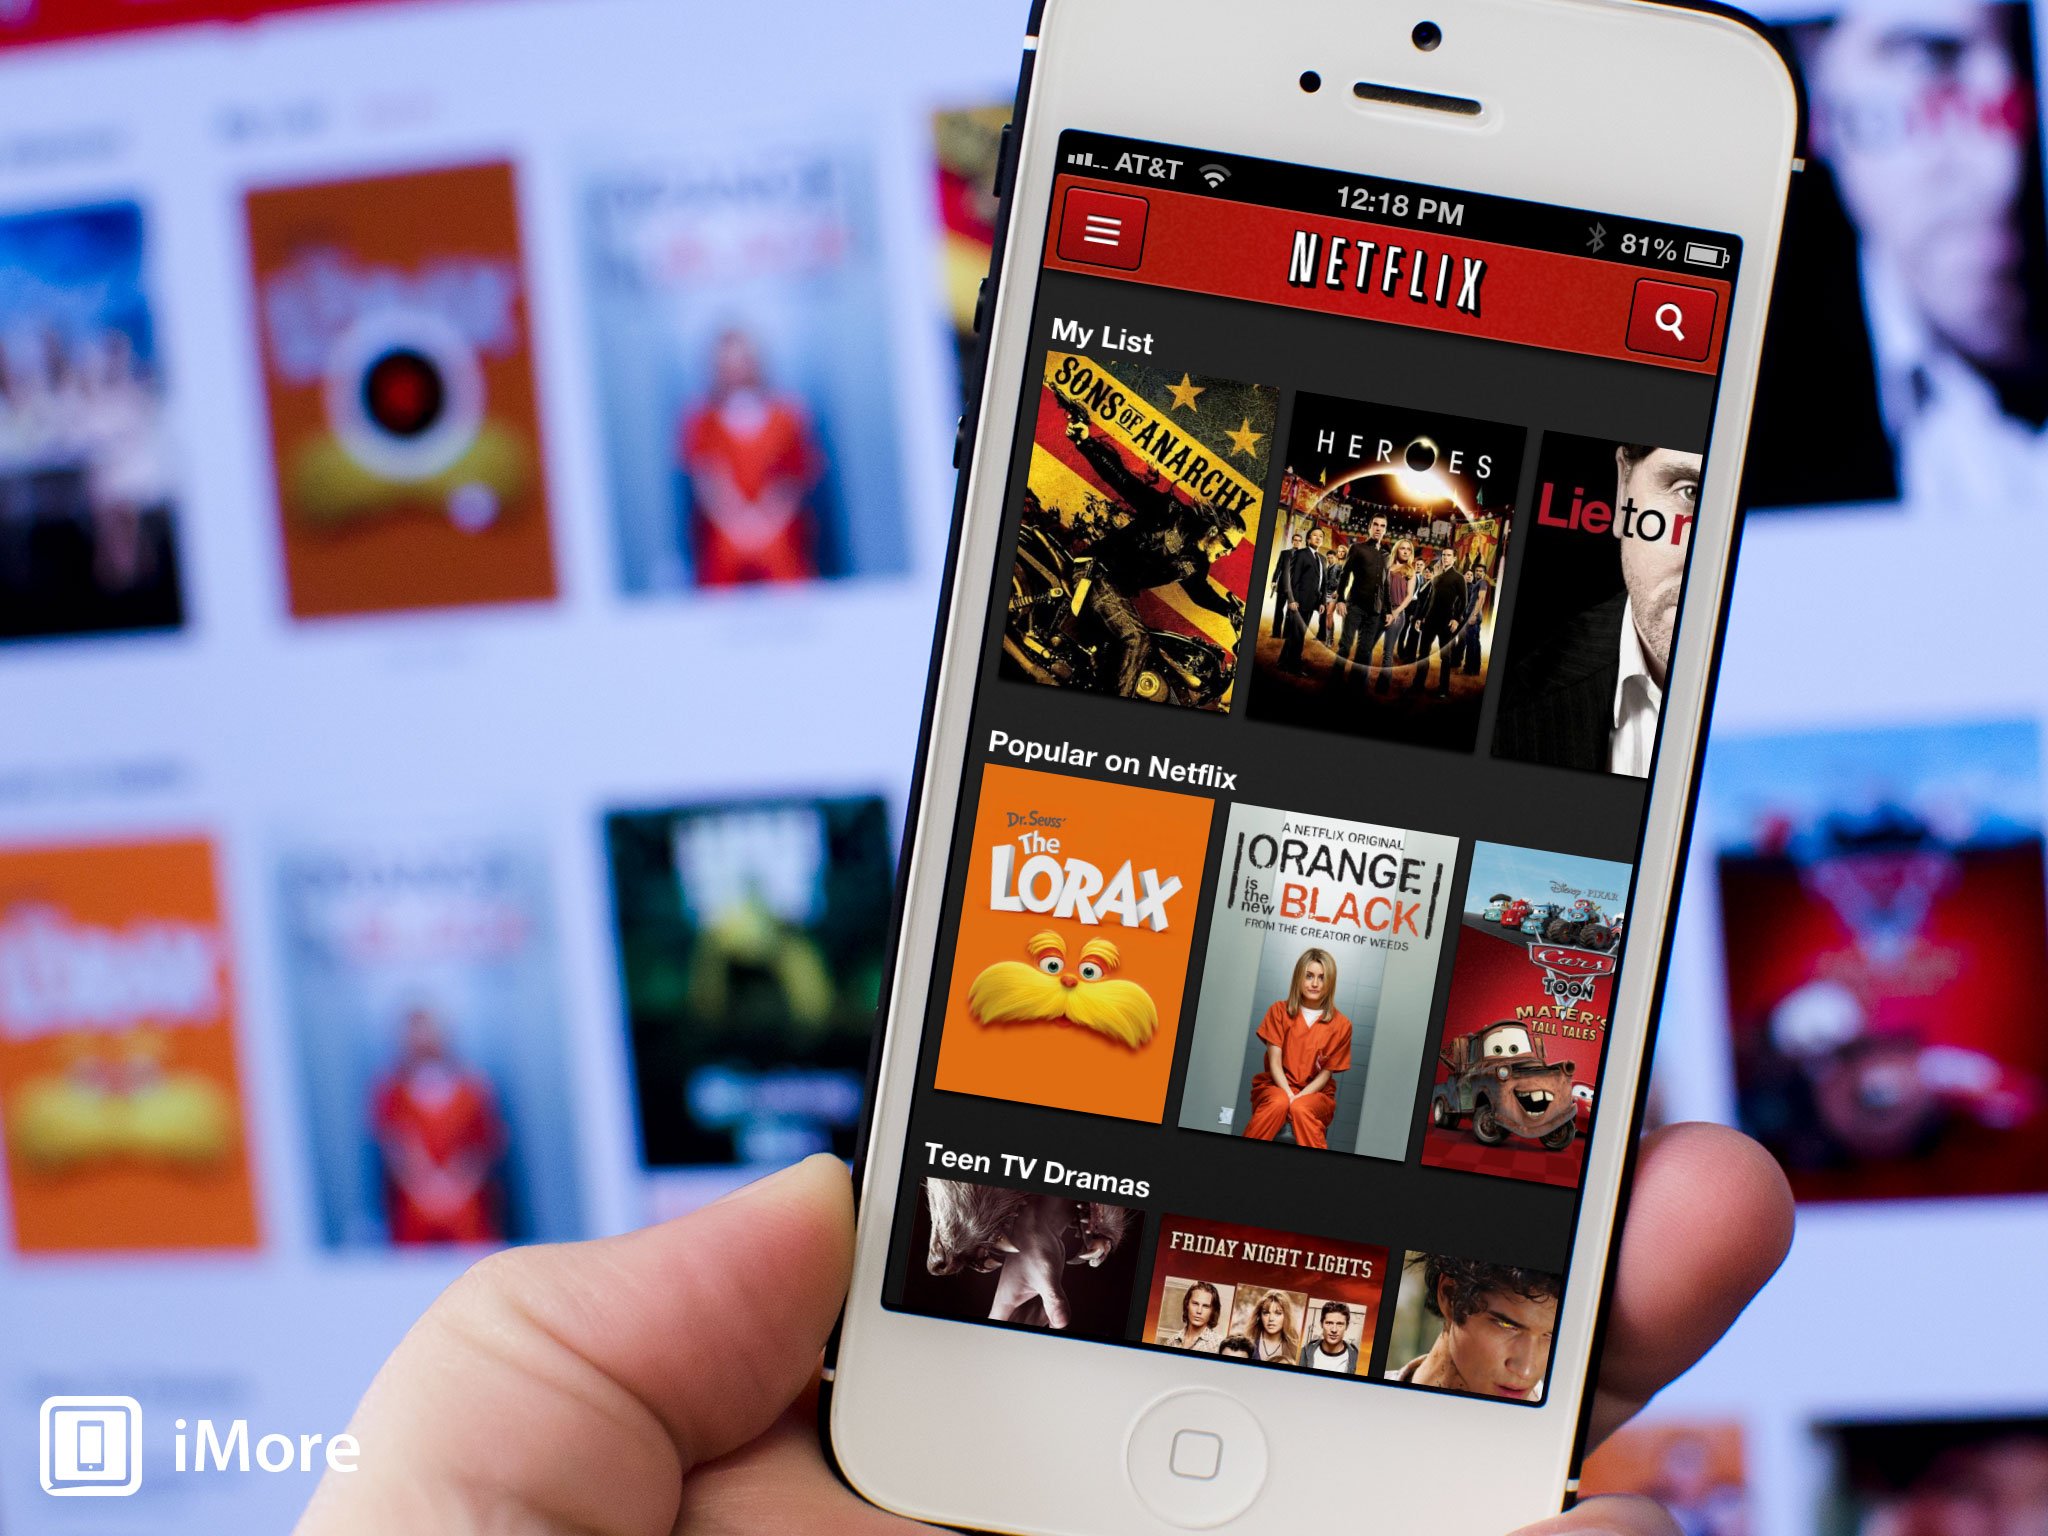 How to use the My List feature in Netflix to save movies and shows for later